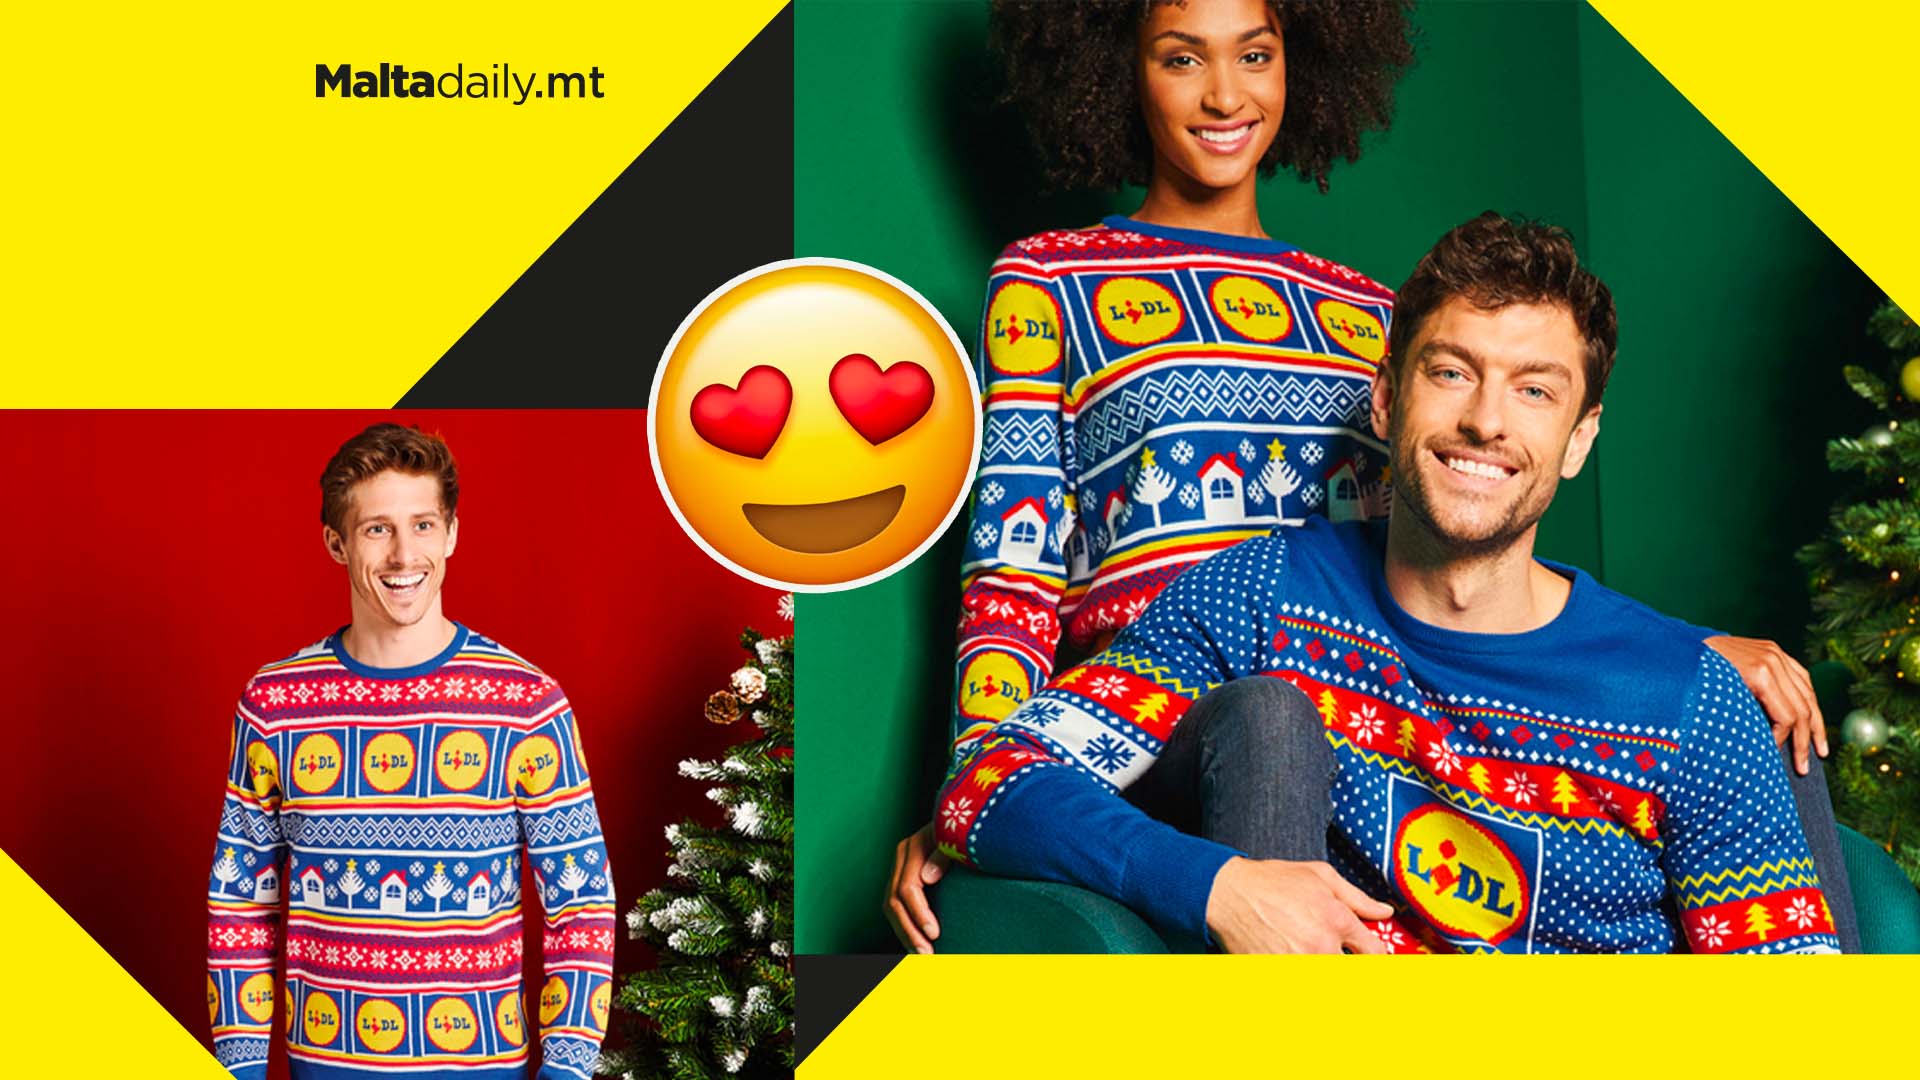 Lidl are doing it again; this time with Christmas jumpers